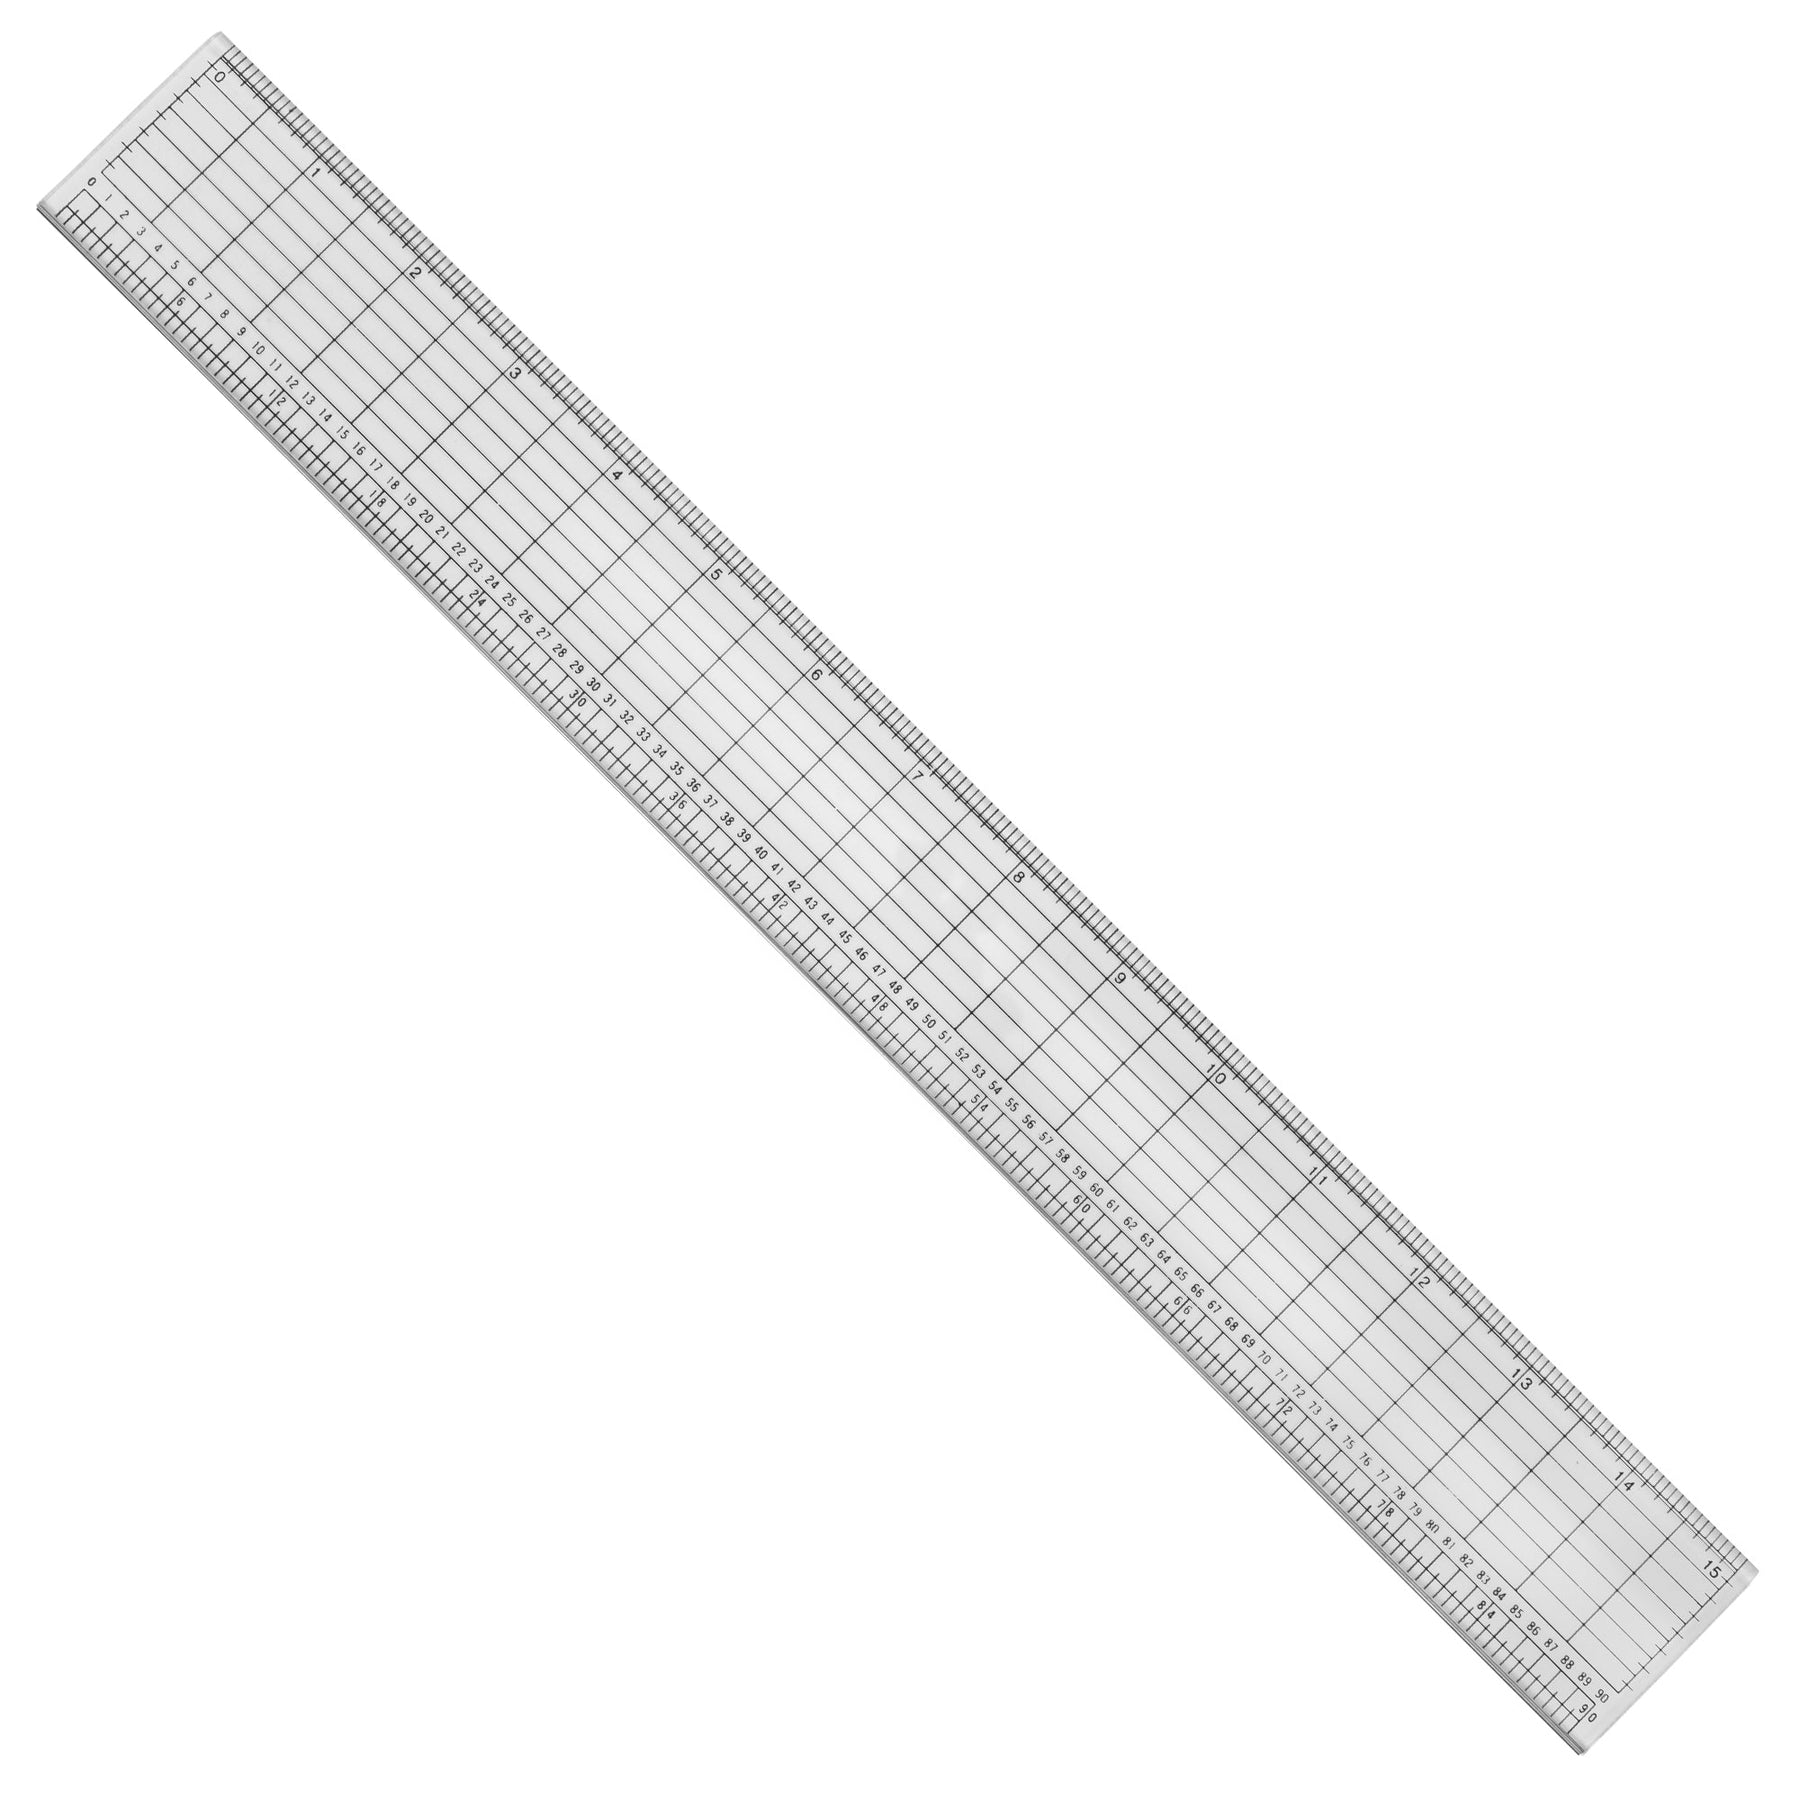 Pacific Arc - Clear Graphic Arts Acrylic Ruler with Metal Edge, 15 Inches